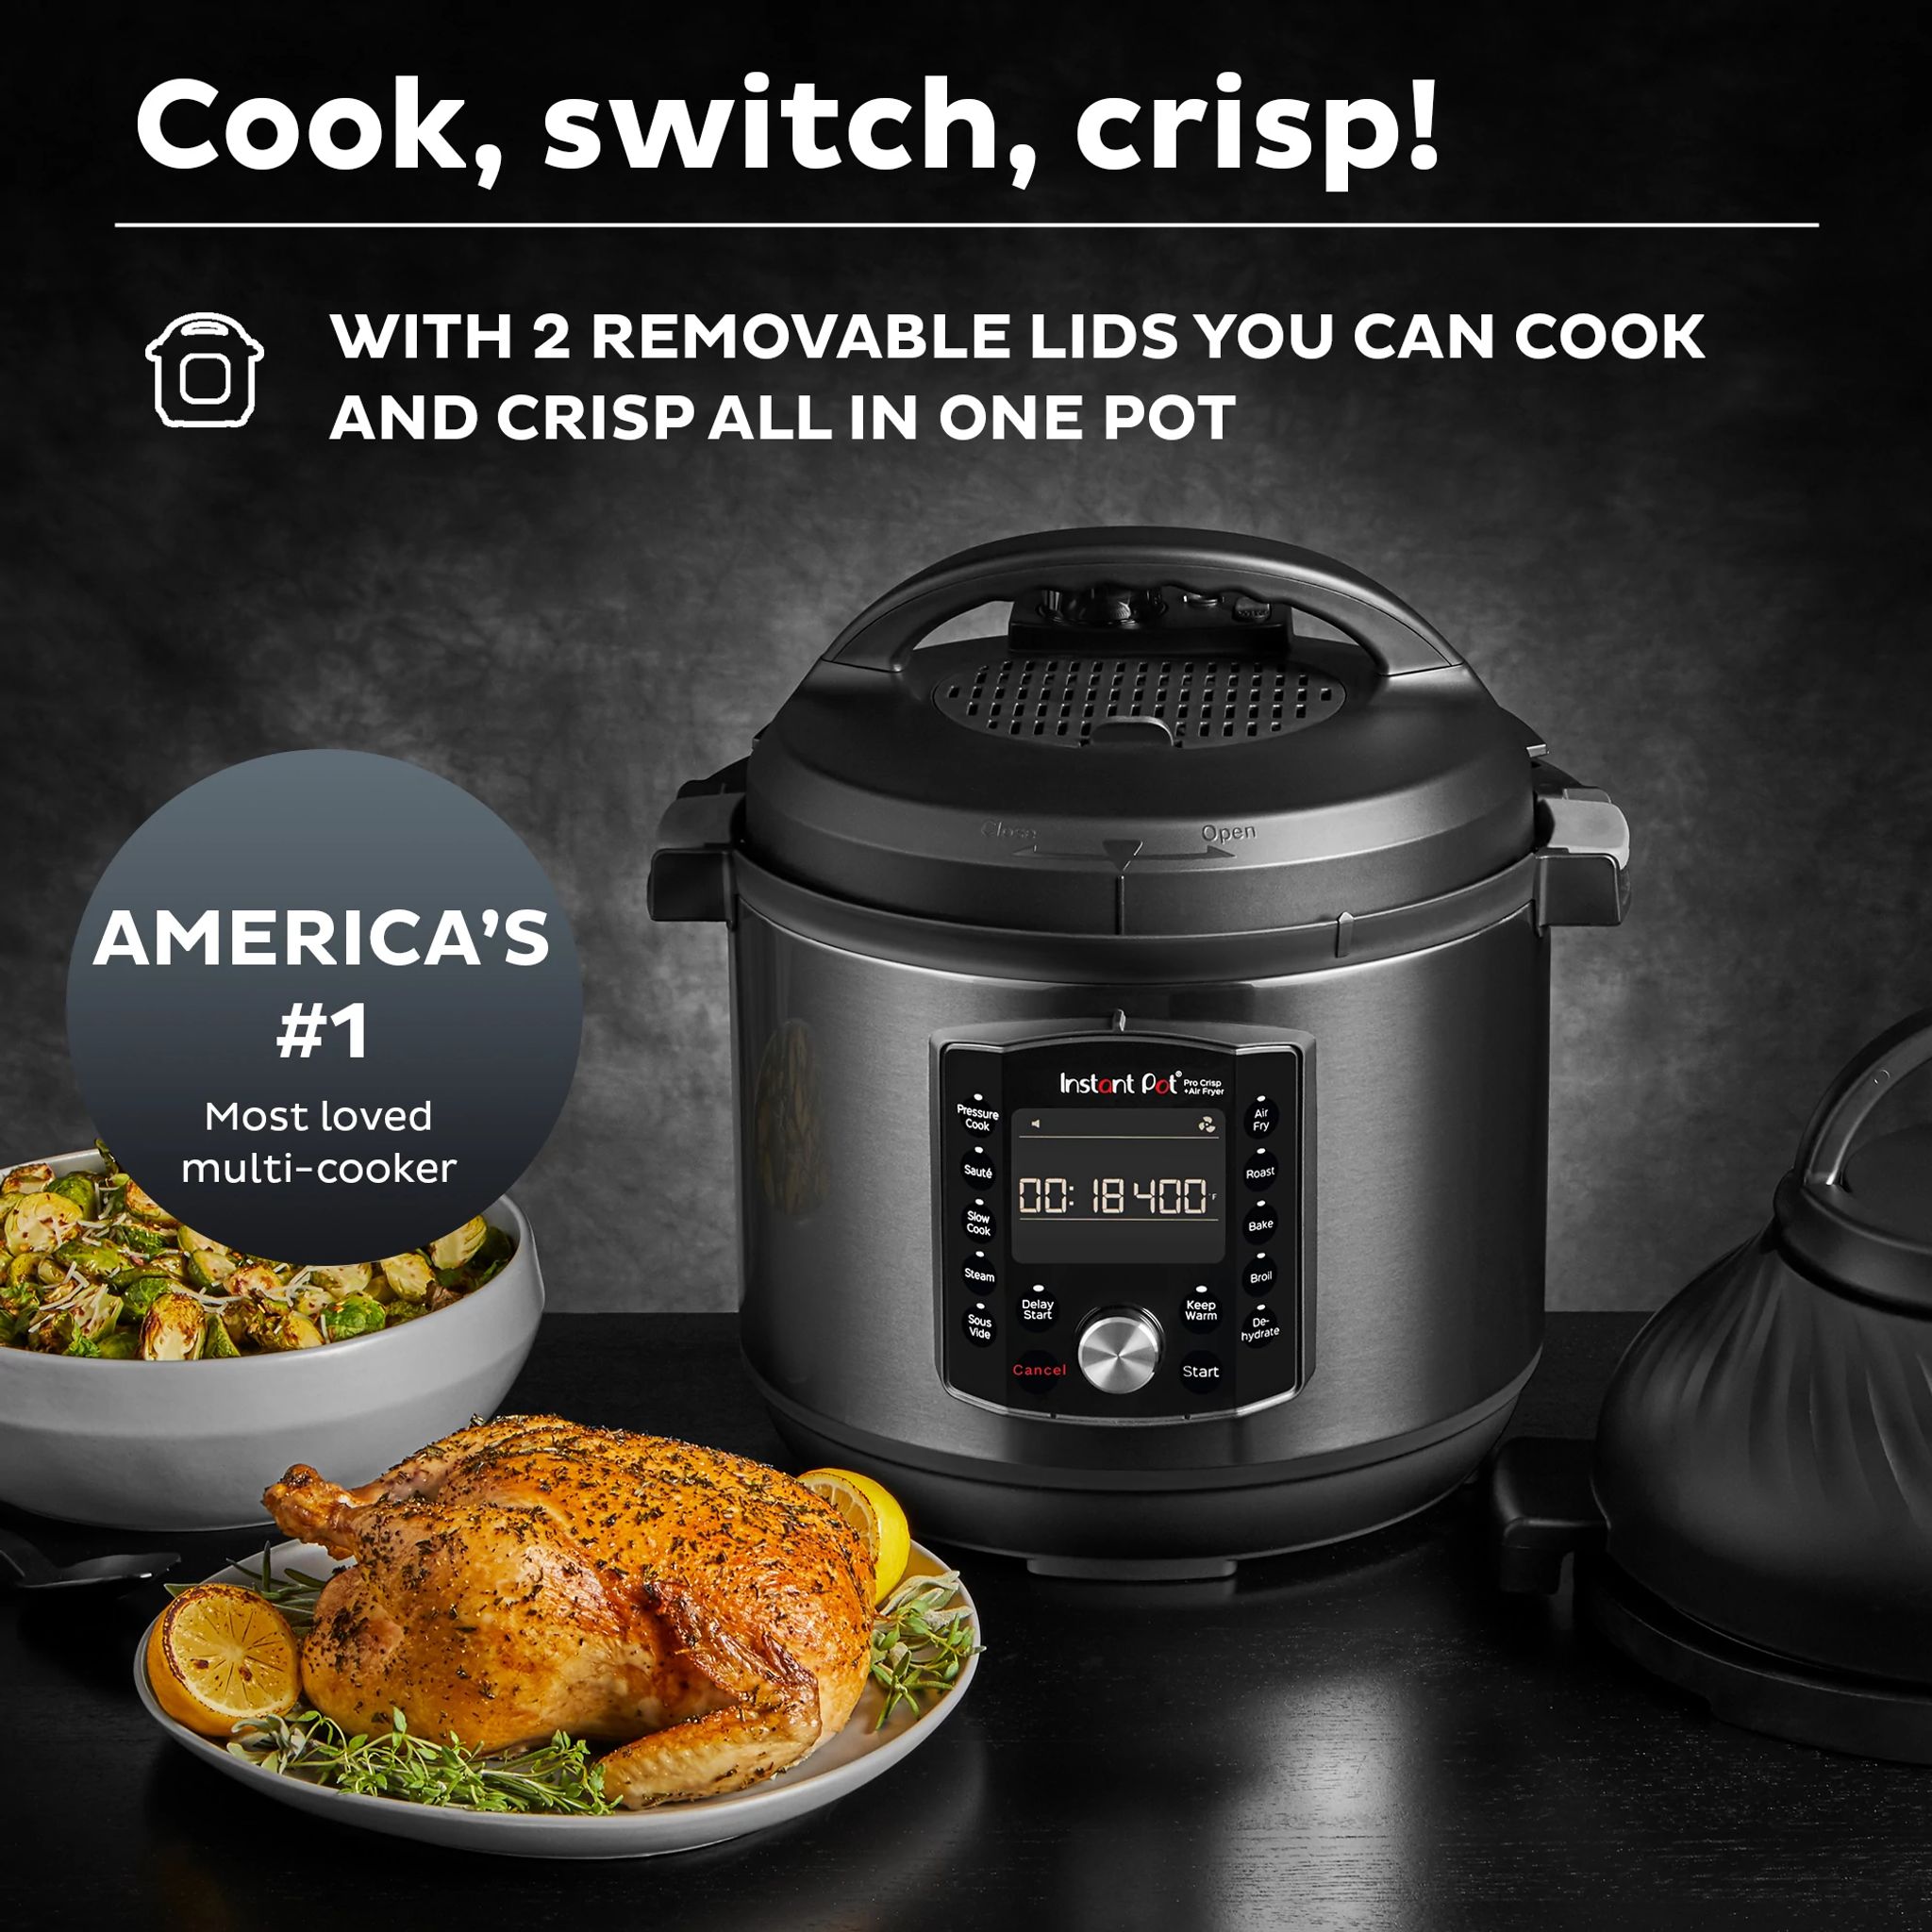 Target Clearance: Instant Pot Multi-Cooker + Air Fryer $44.99